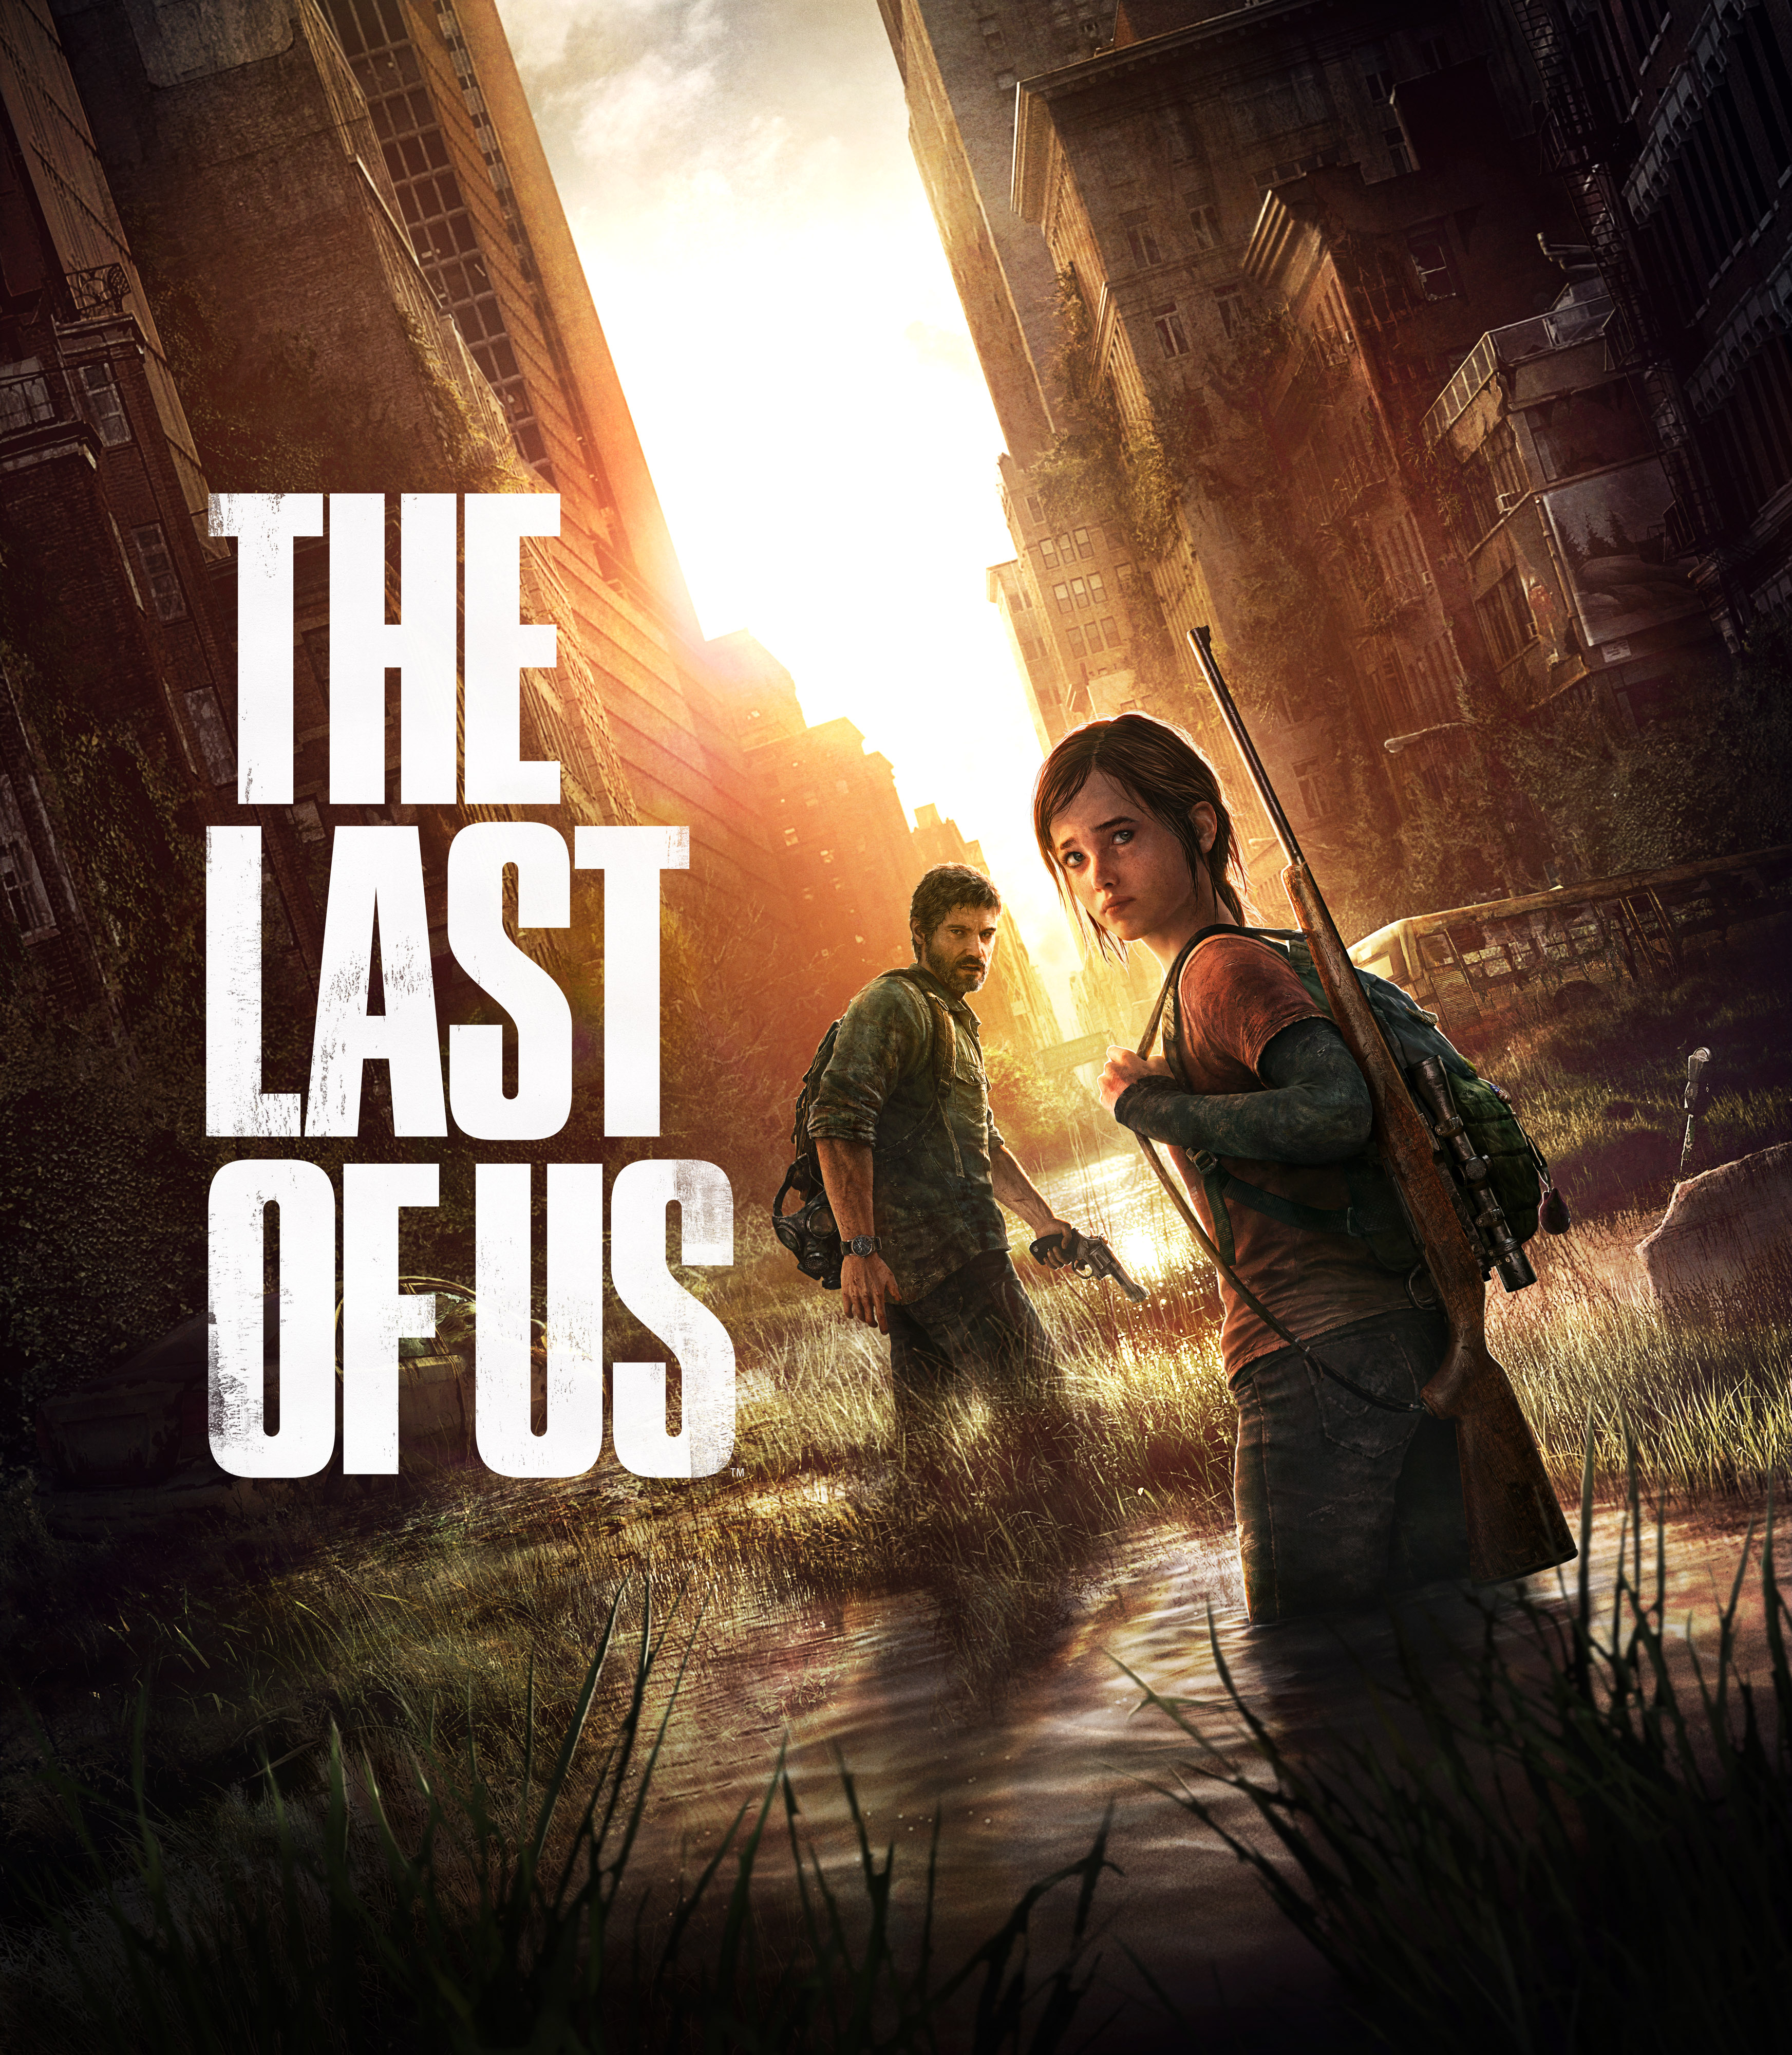 http://www.gamer.ru/system/attached_images/images/000/591/514/original/the_last_of_us_key_art.jpg